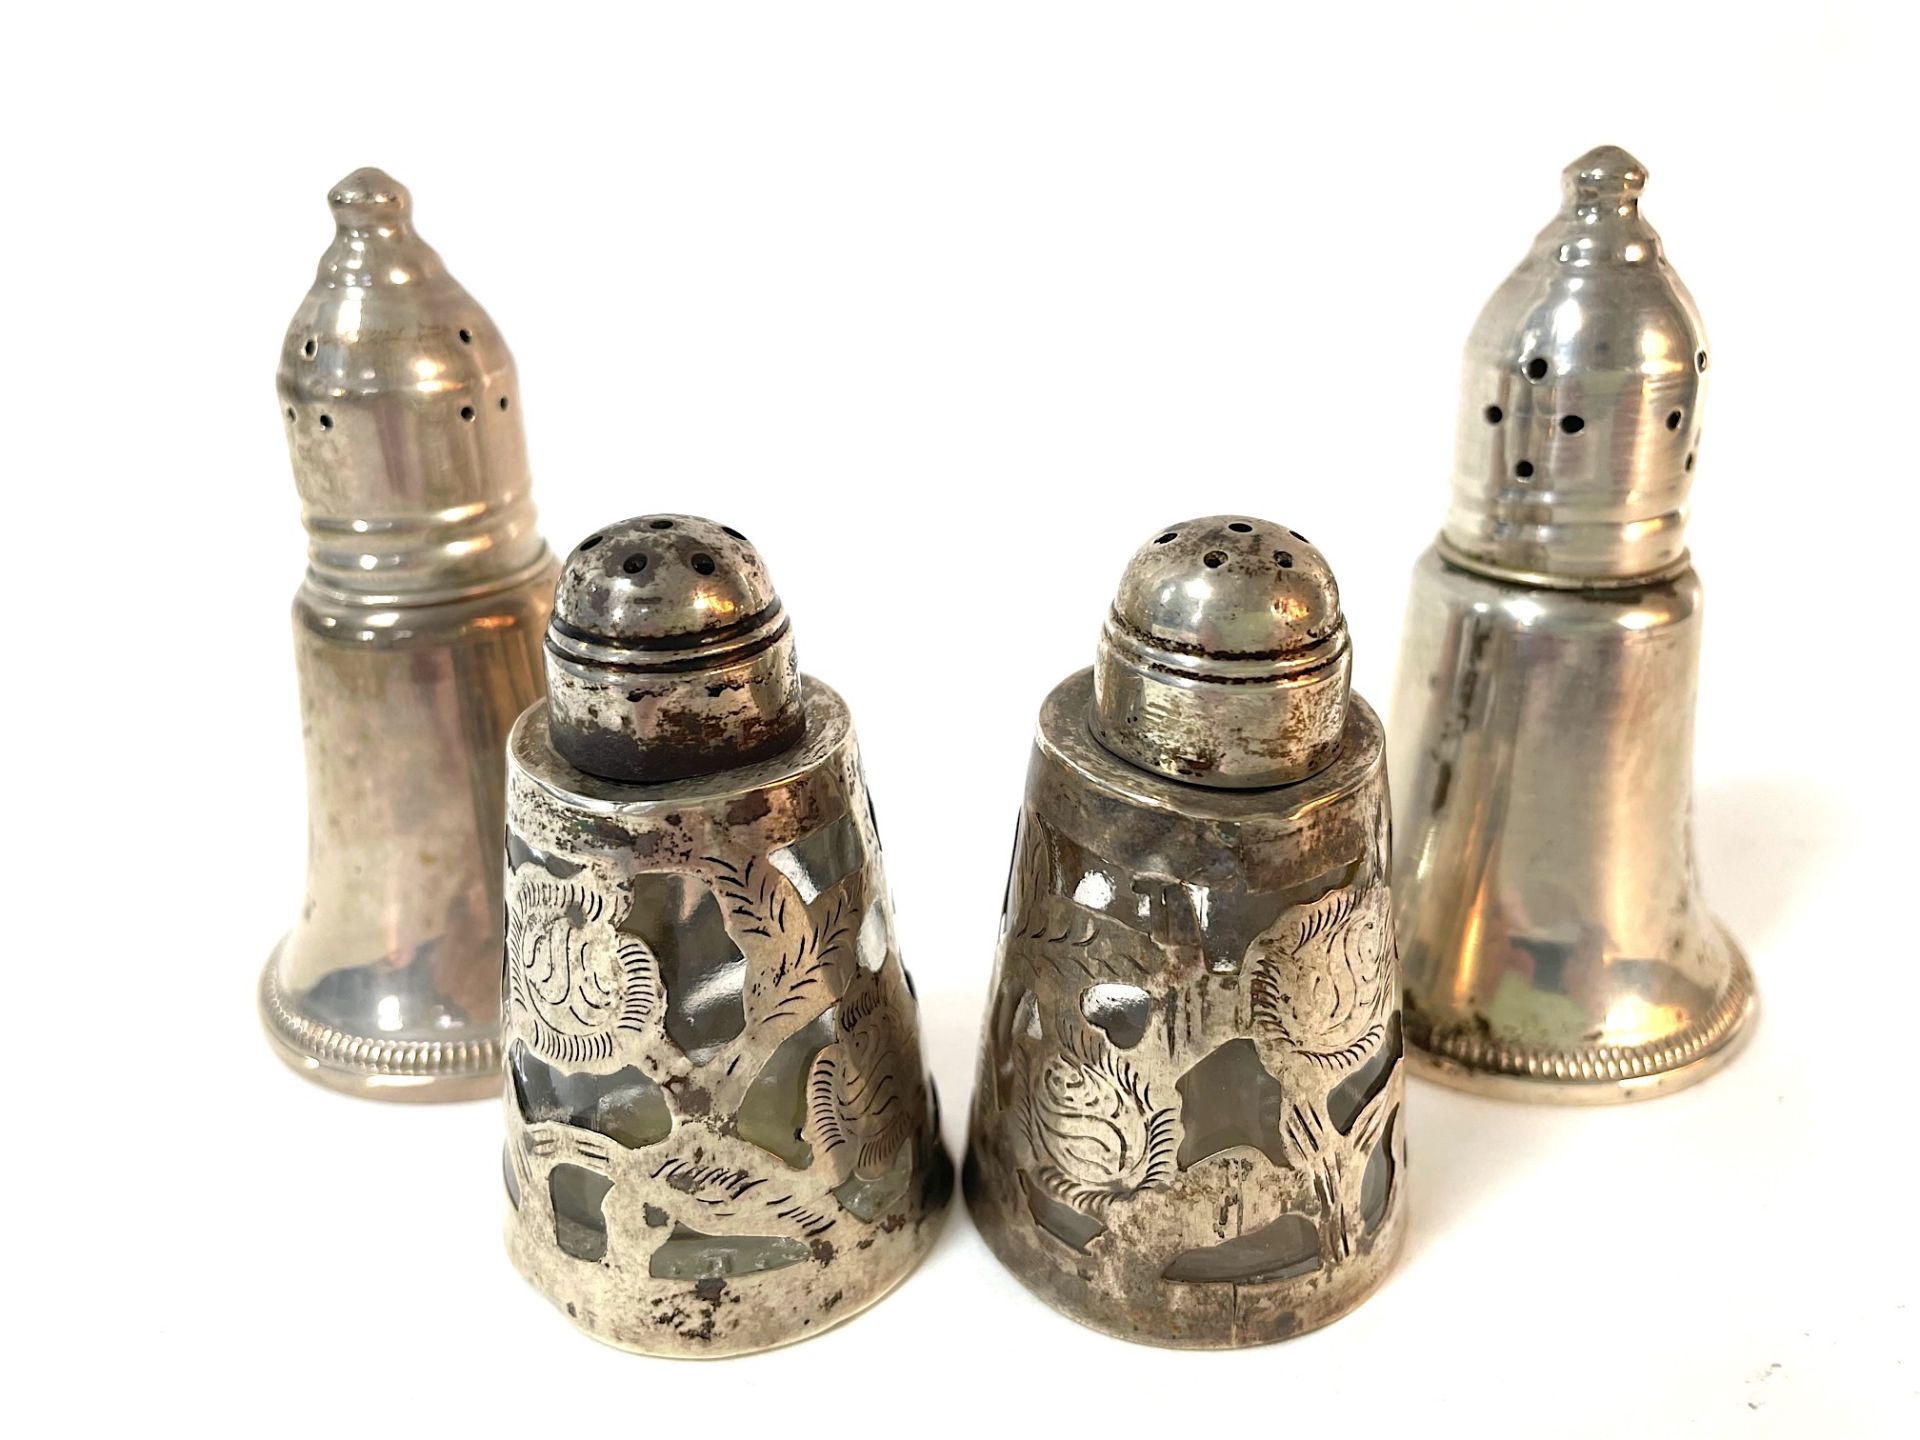 40 pairs of salt/pepper and spice shakers, - Image 73 of 88